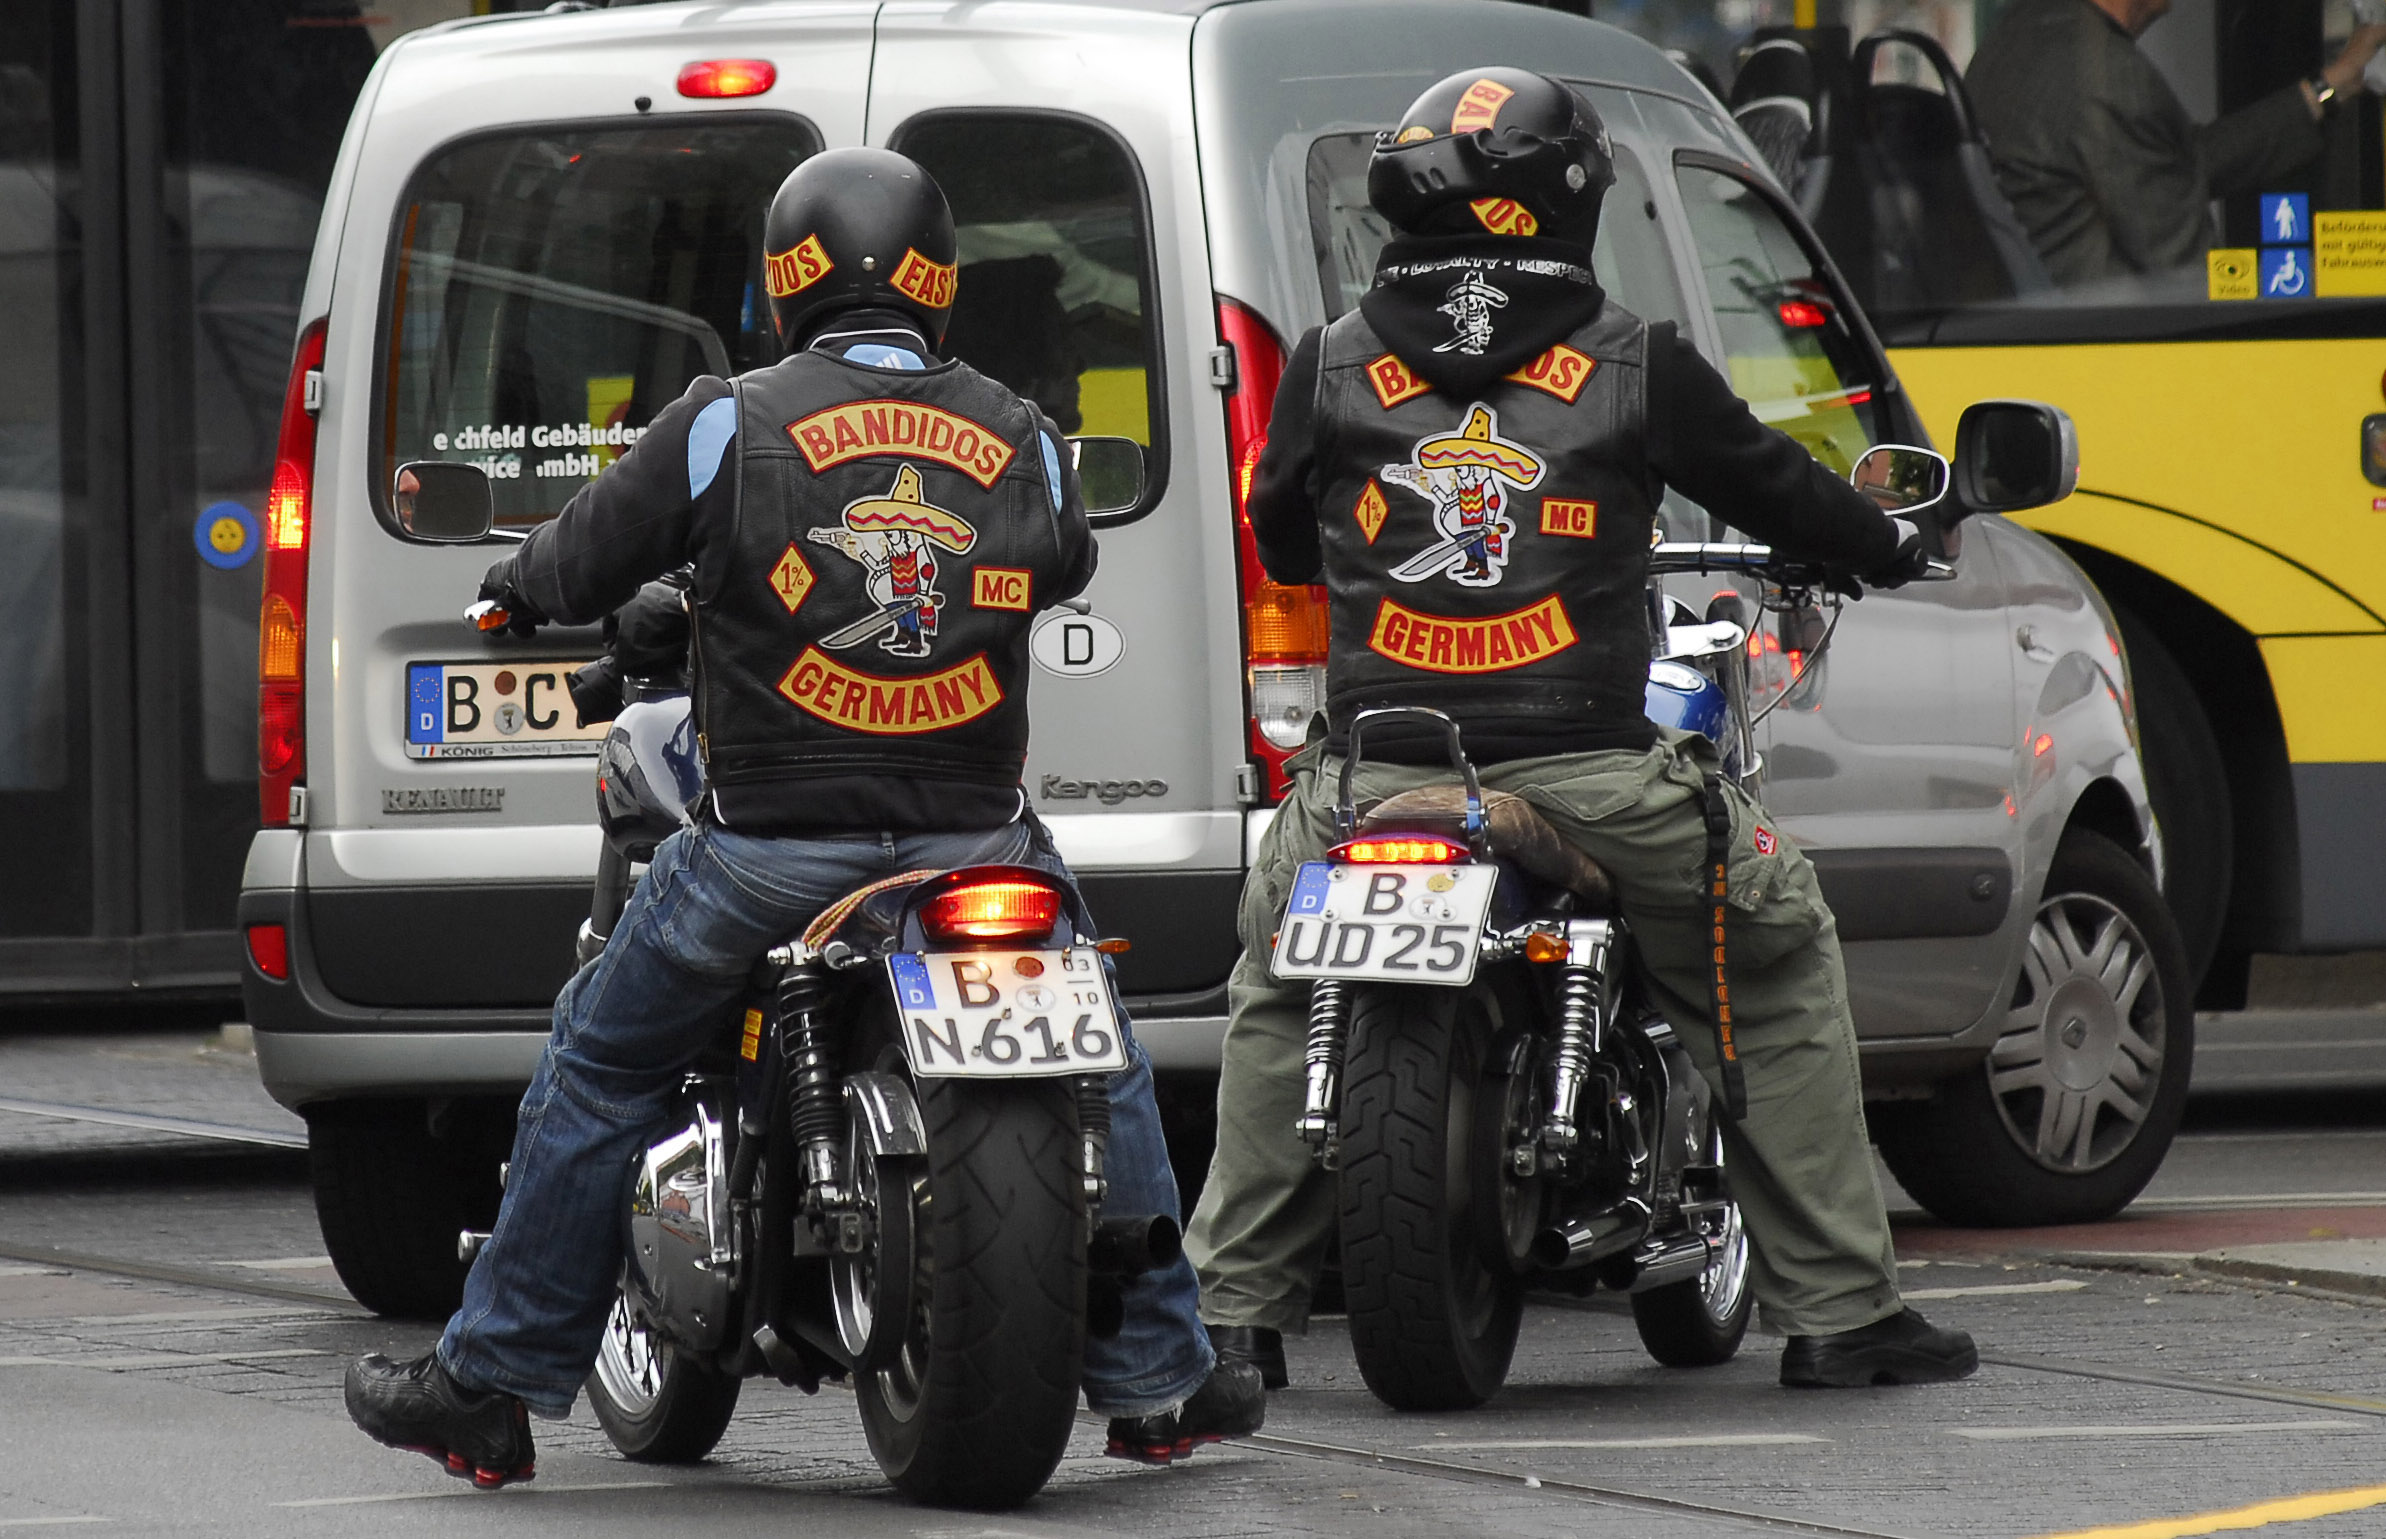 PHOTO: Members of the Bandidos Motorcycle Club are seen in Berlin, May 30, 2009.